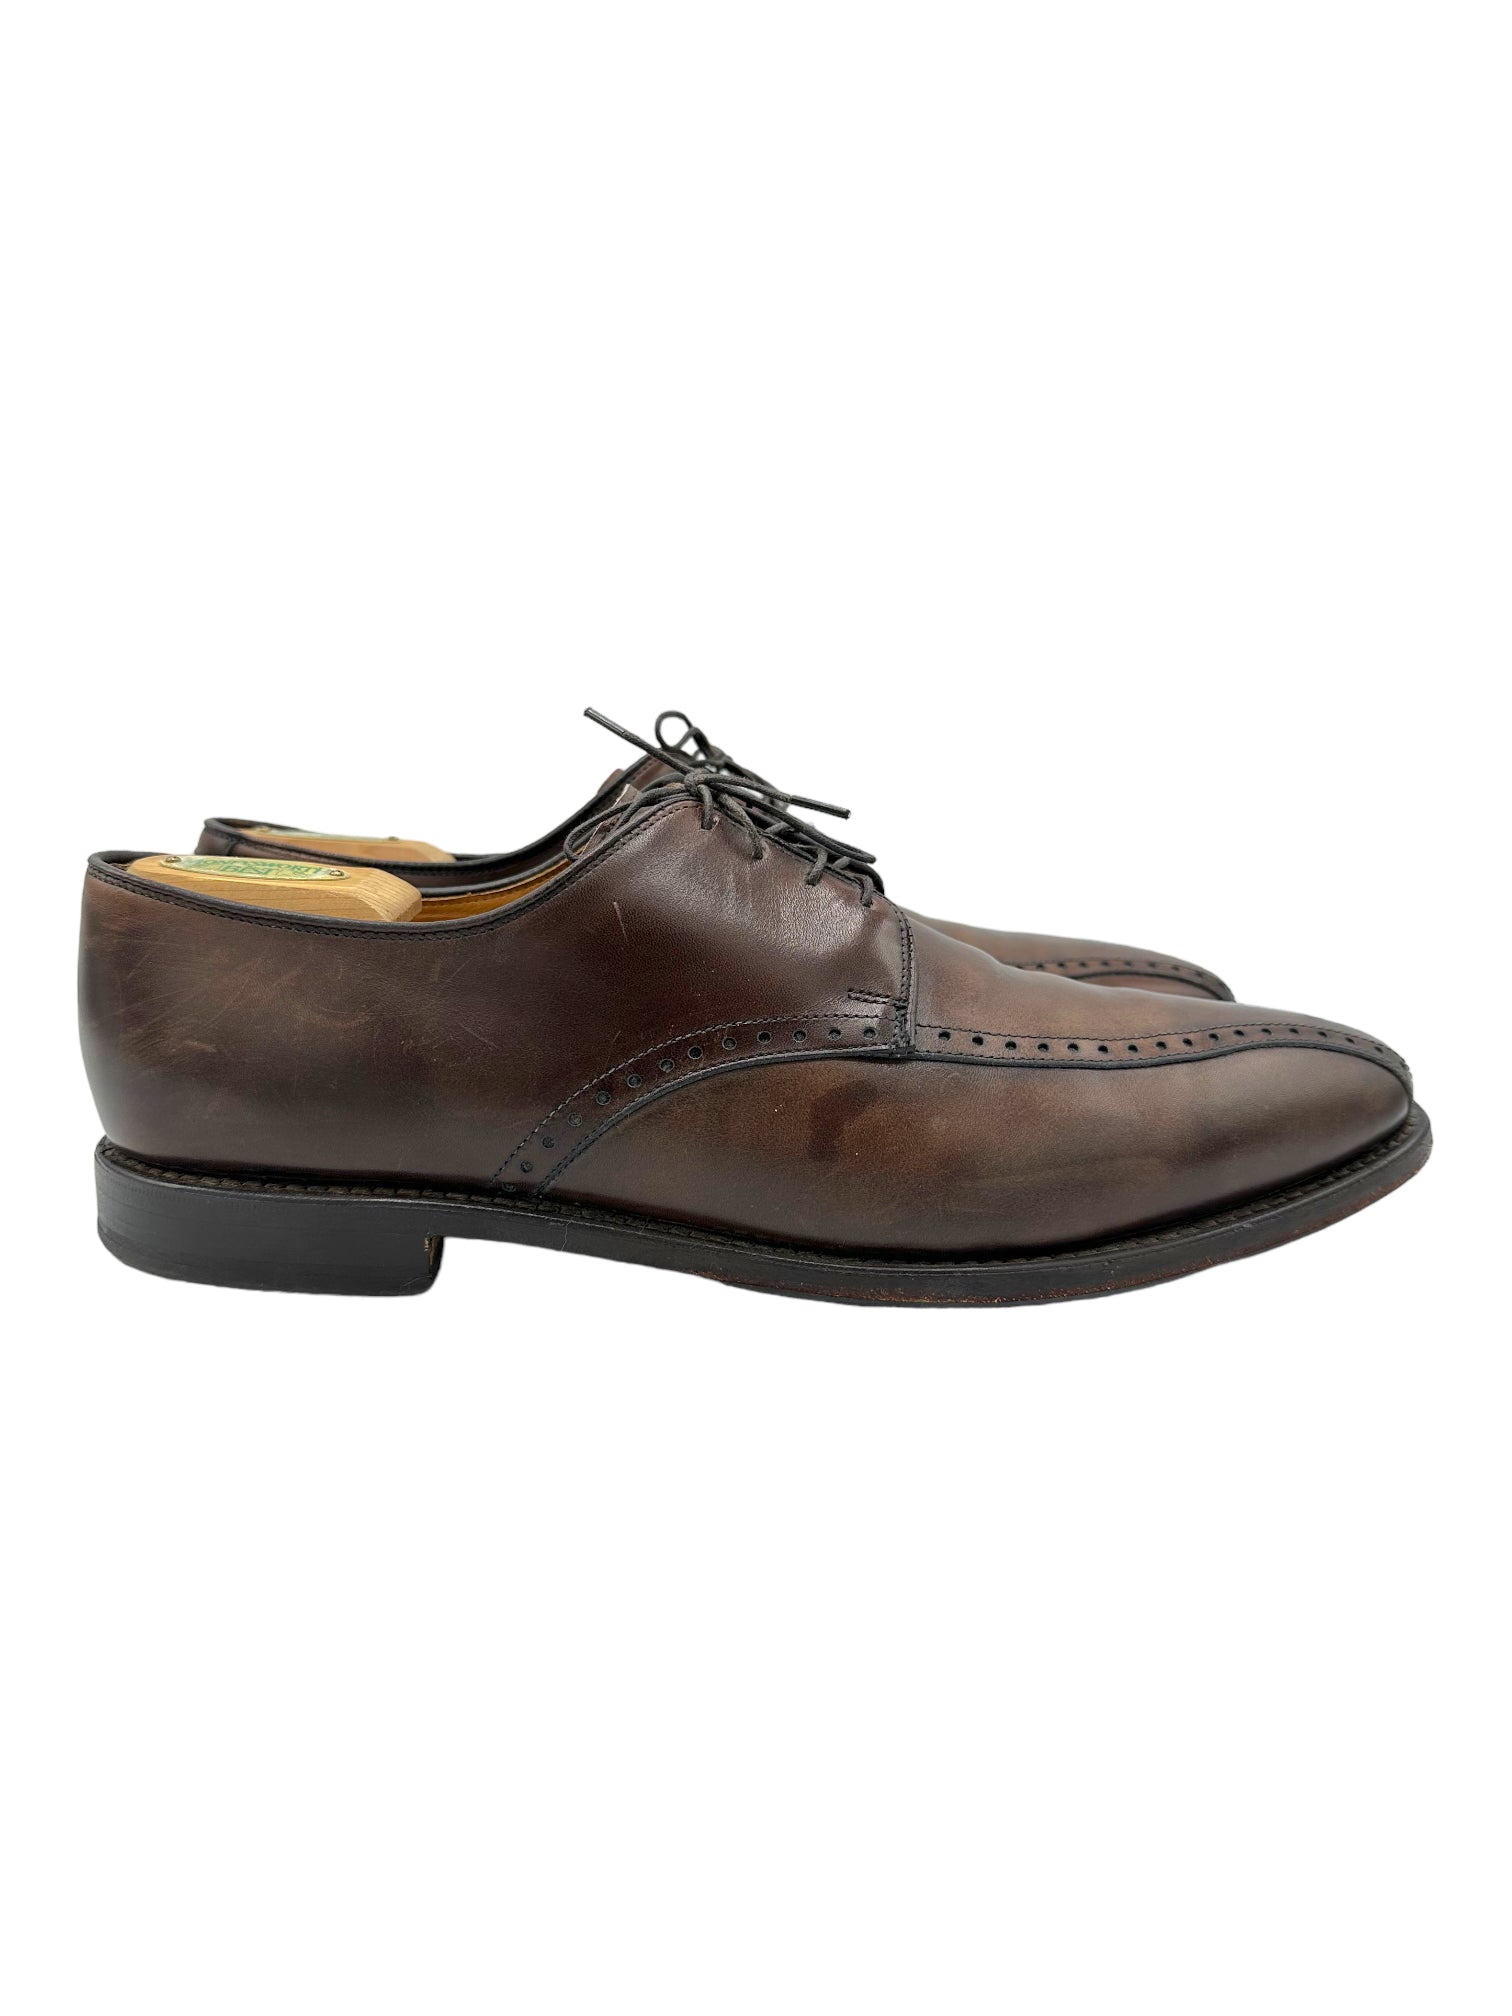 Allen Edmonds Wendell Brown Leather Oxford Dress Shoes - Genuine Design Luxury Consignment for Men. New & Pre-Owned Clothing, Shoes, & Accessories. Calgary, Canada